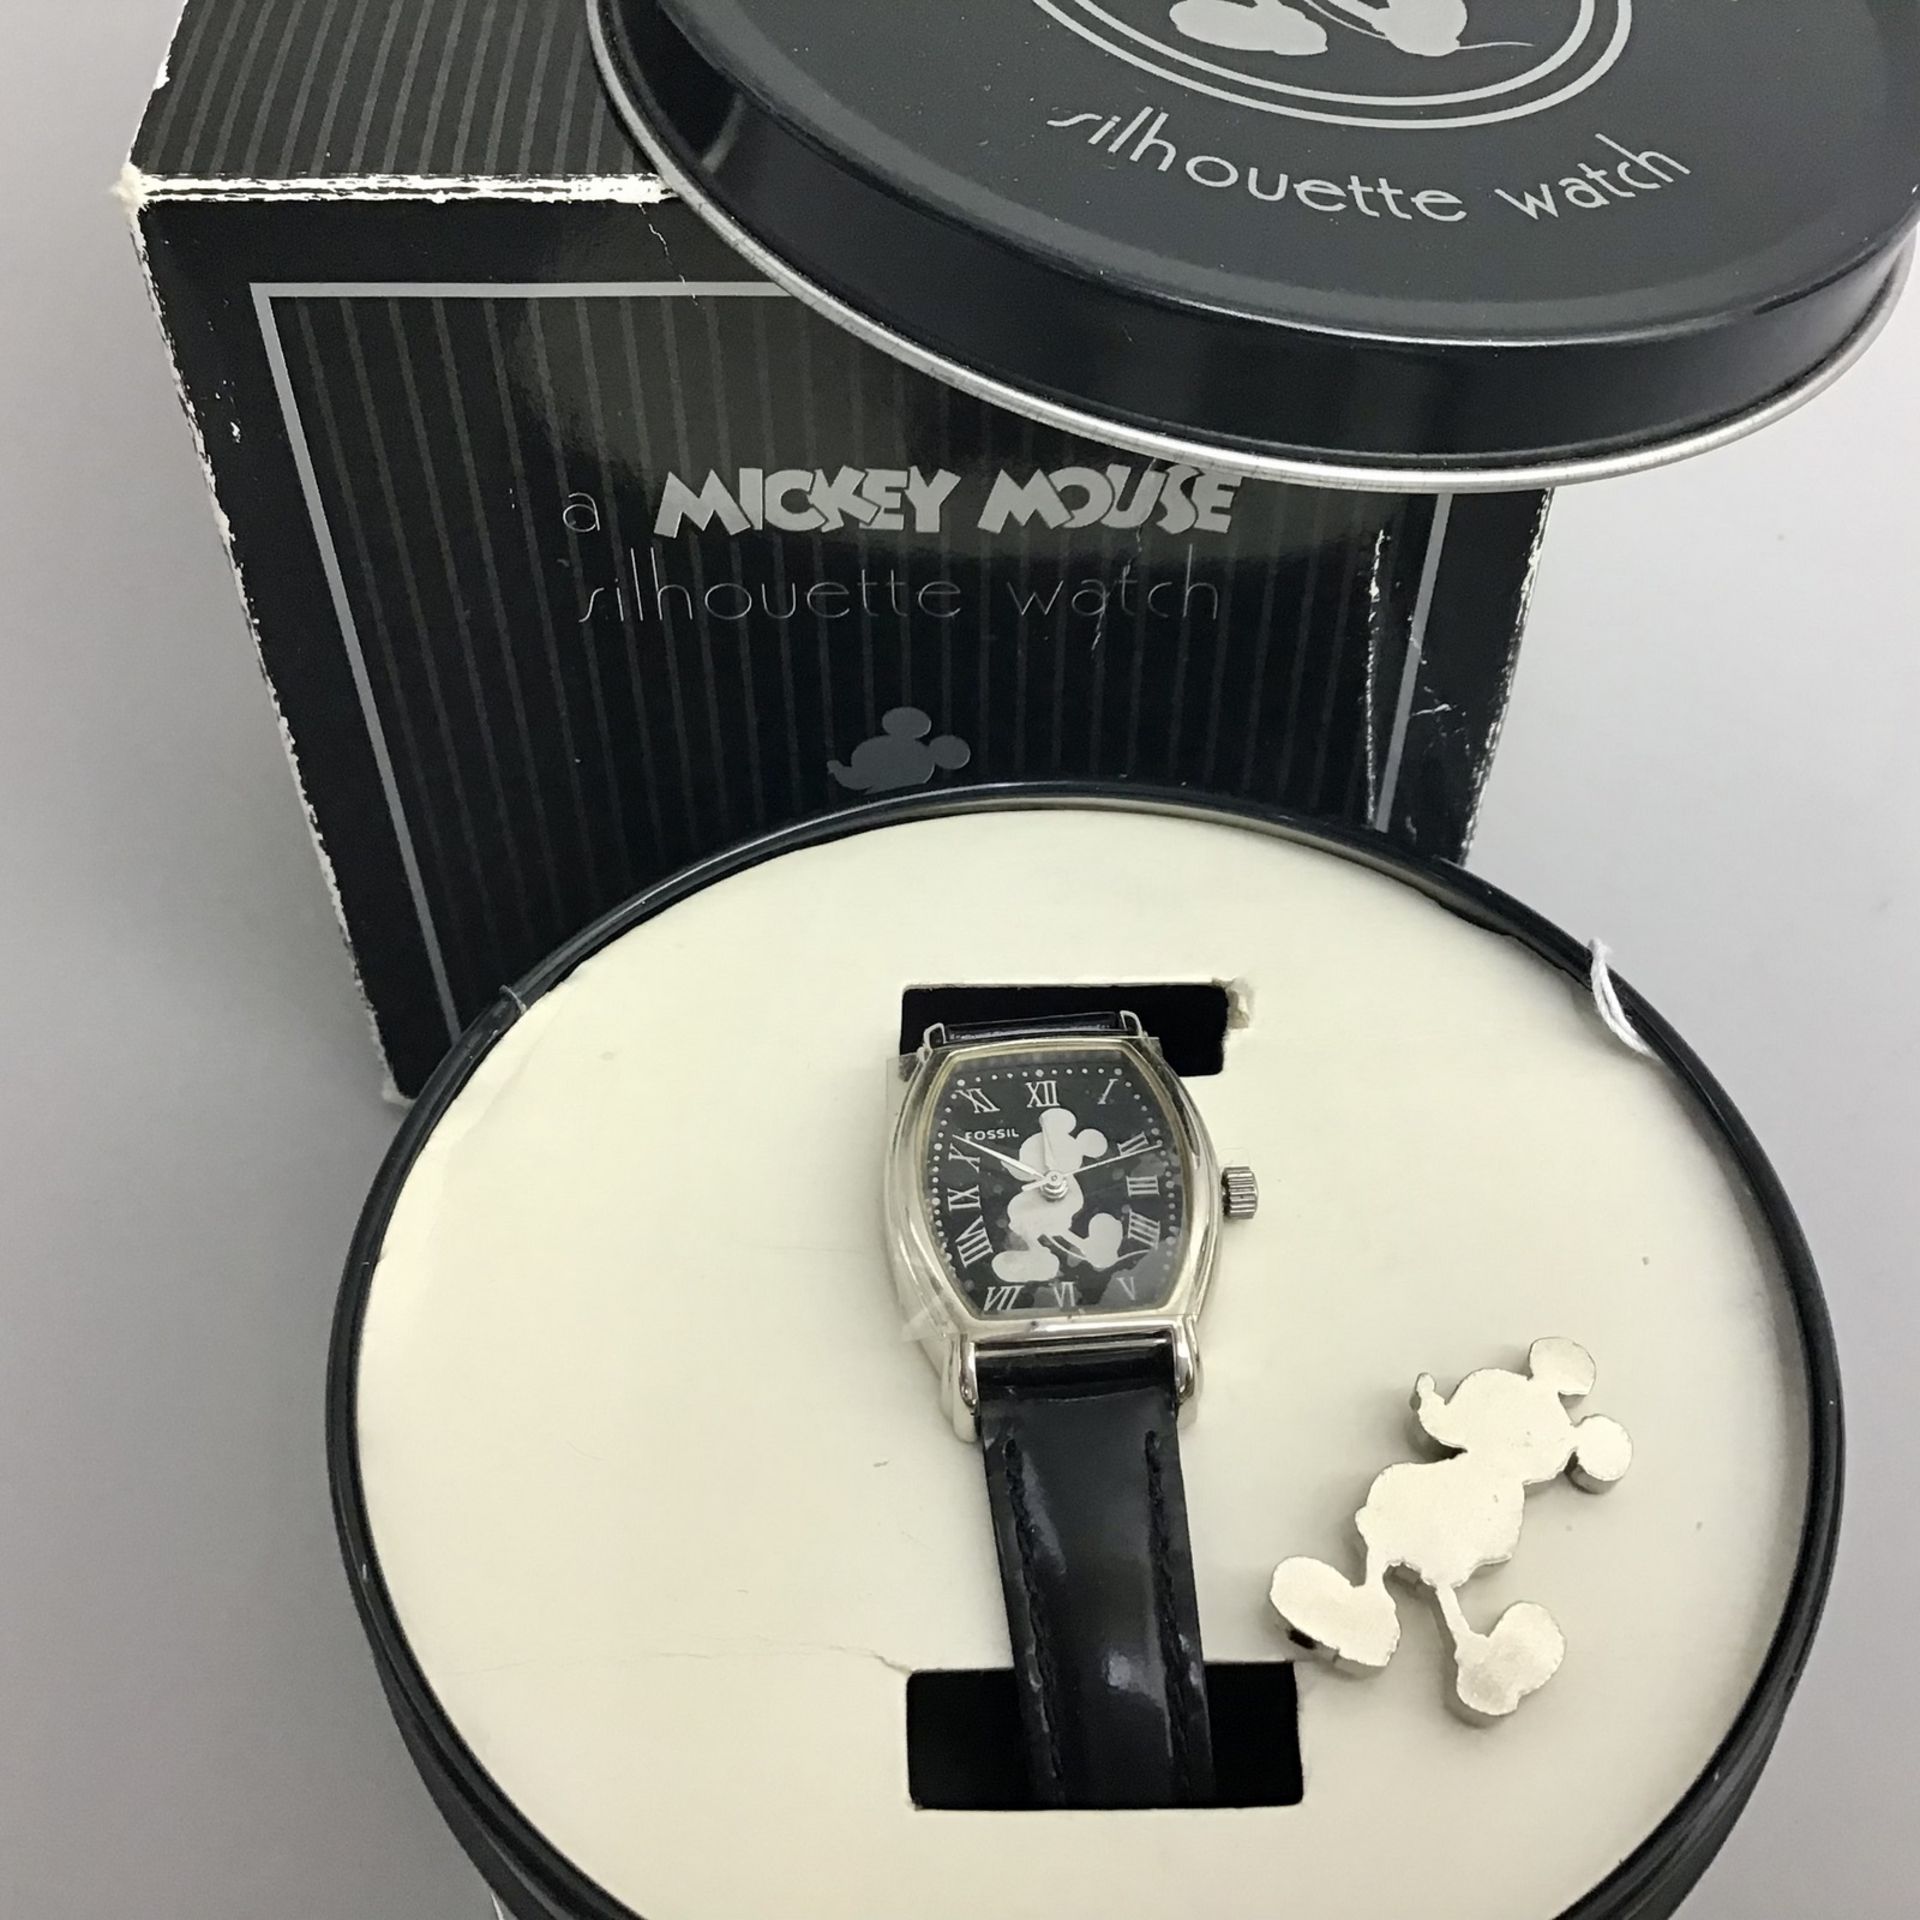 Fossil Armbanduhr "Micky Mouse", Silhouette Watch